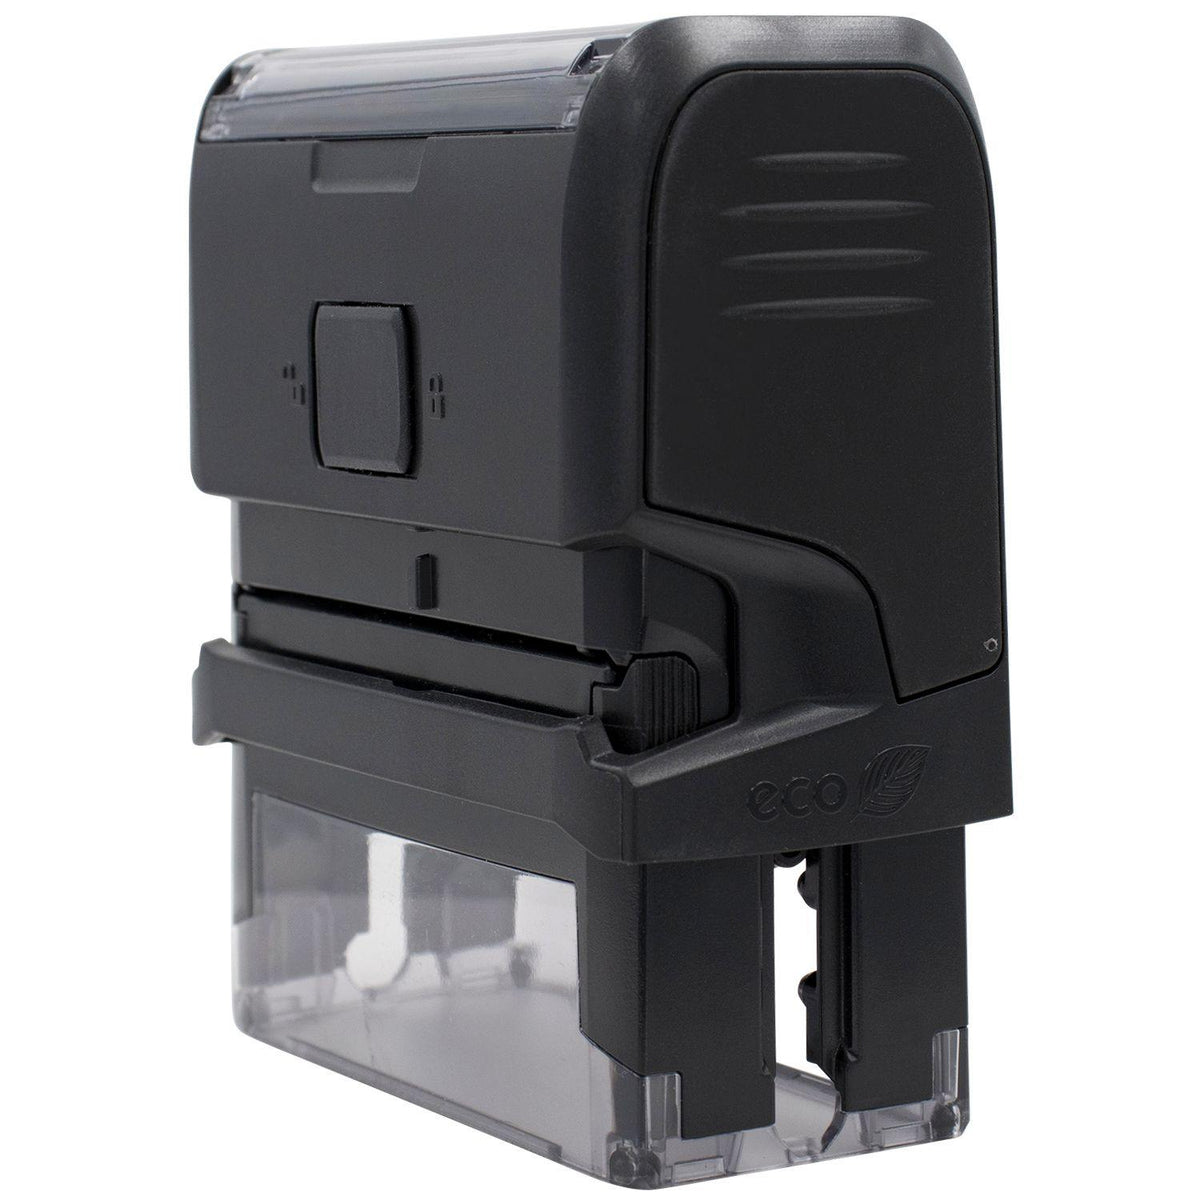 Self-Inking Aviso Stamp - Engineer Seal Stamps - Brand_Trodat, Impression Size_Small, Stamp Type_Self-Inking Stamp, Type of Use_Finance, Type of Use_Legal, Type of Use_Office